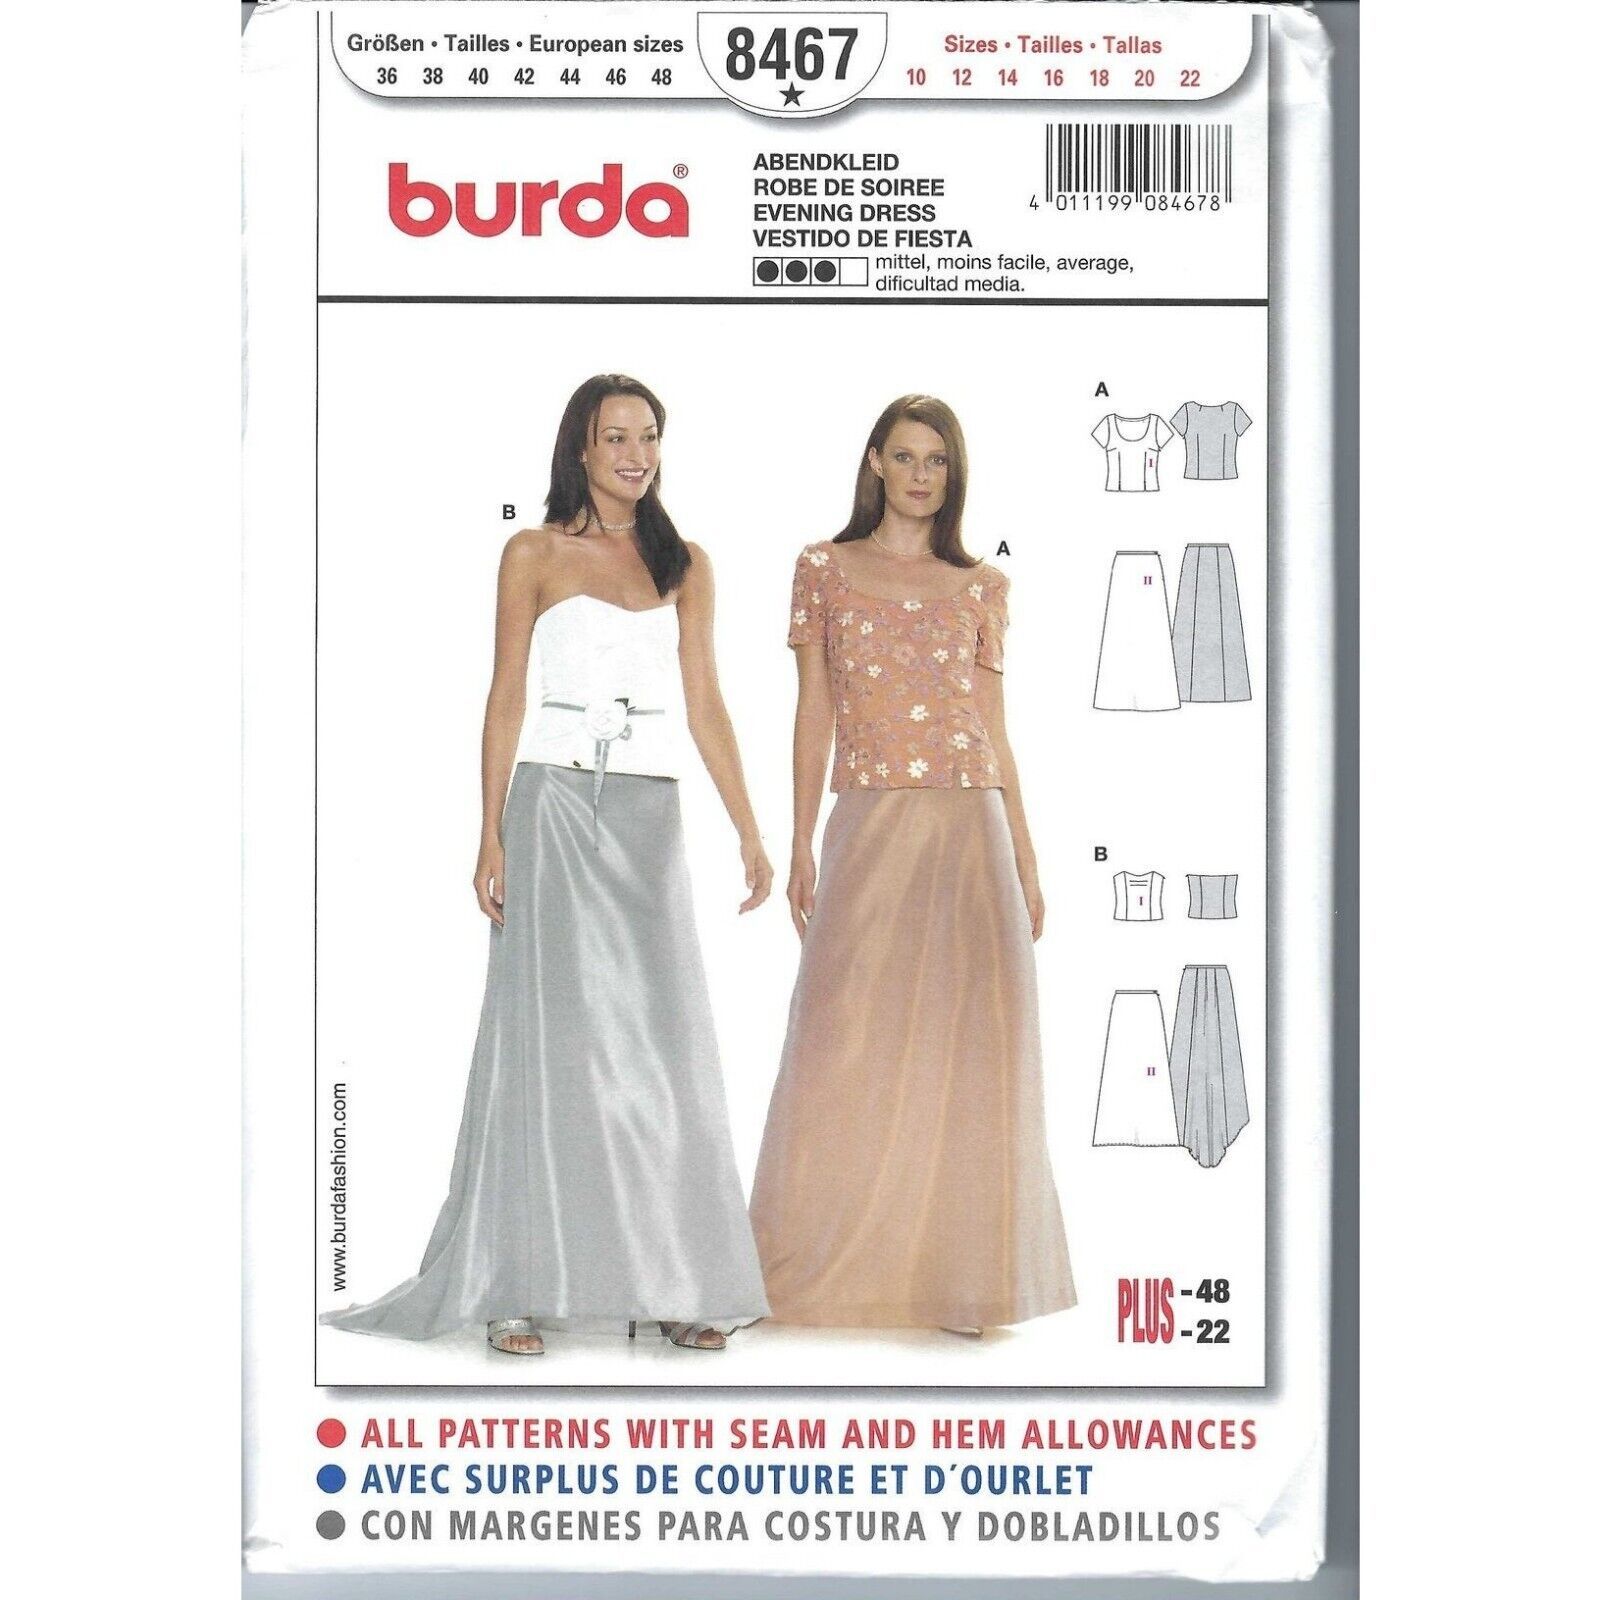 Burda Sewing Pattern 8467 Evening Dress Gown Misses Size 10-22 - $8.99